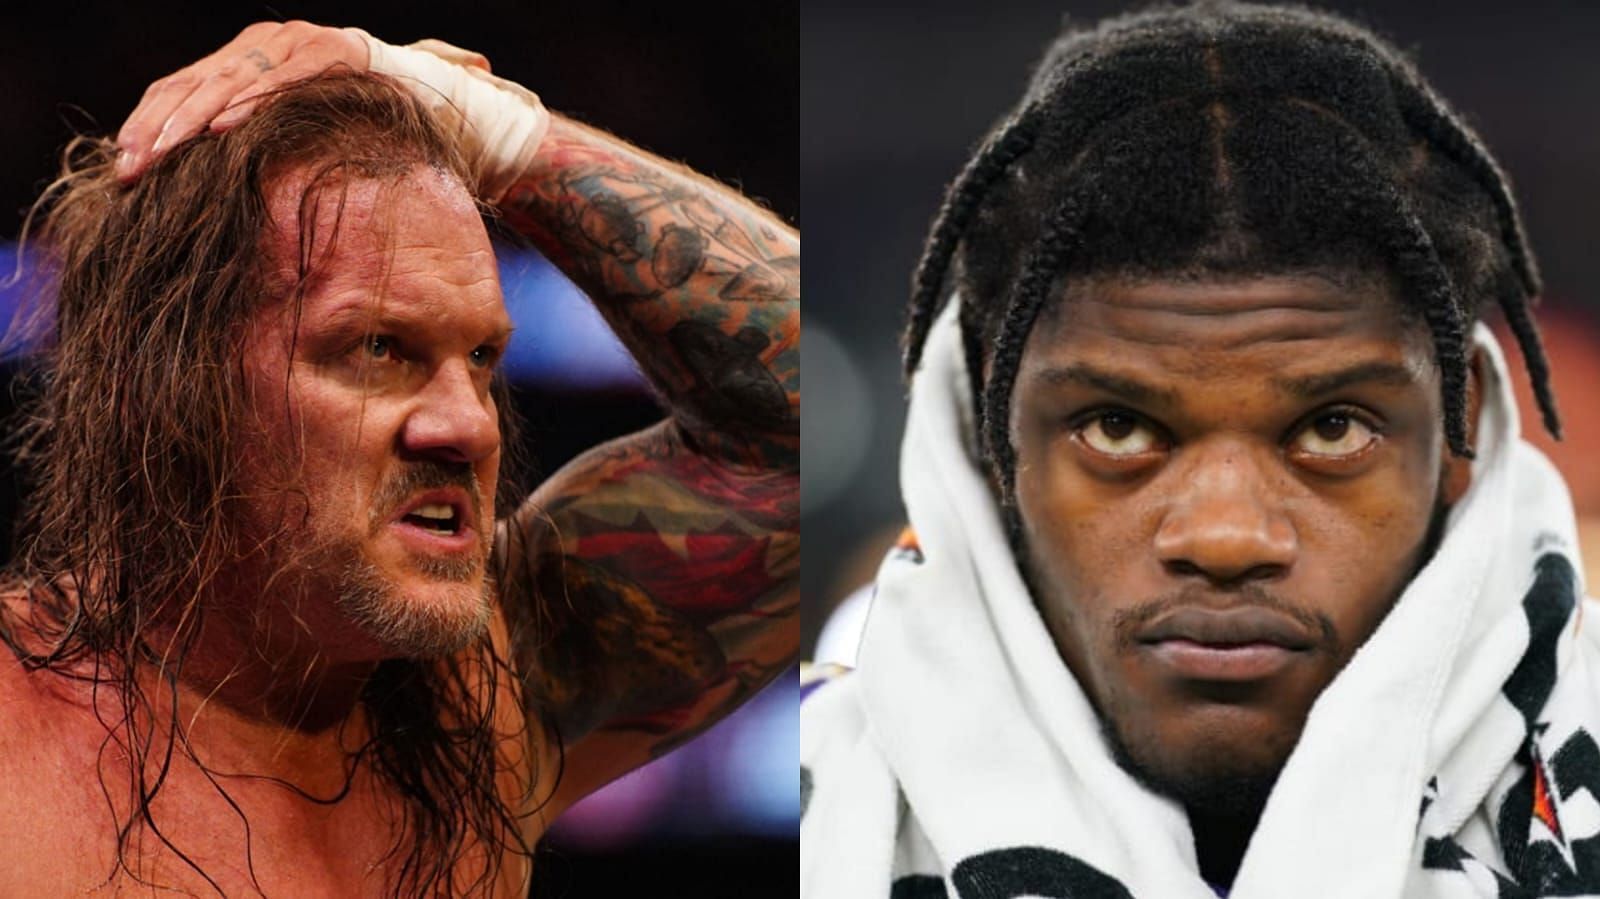 Professional wrestler Chris Jericho recently called out Lamar Jackson at an AEW event 